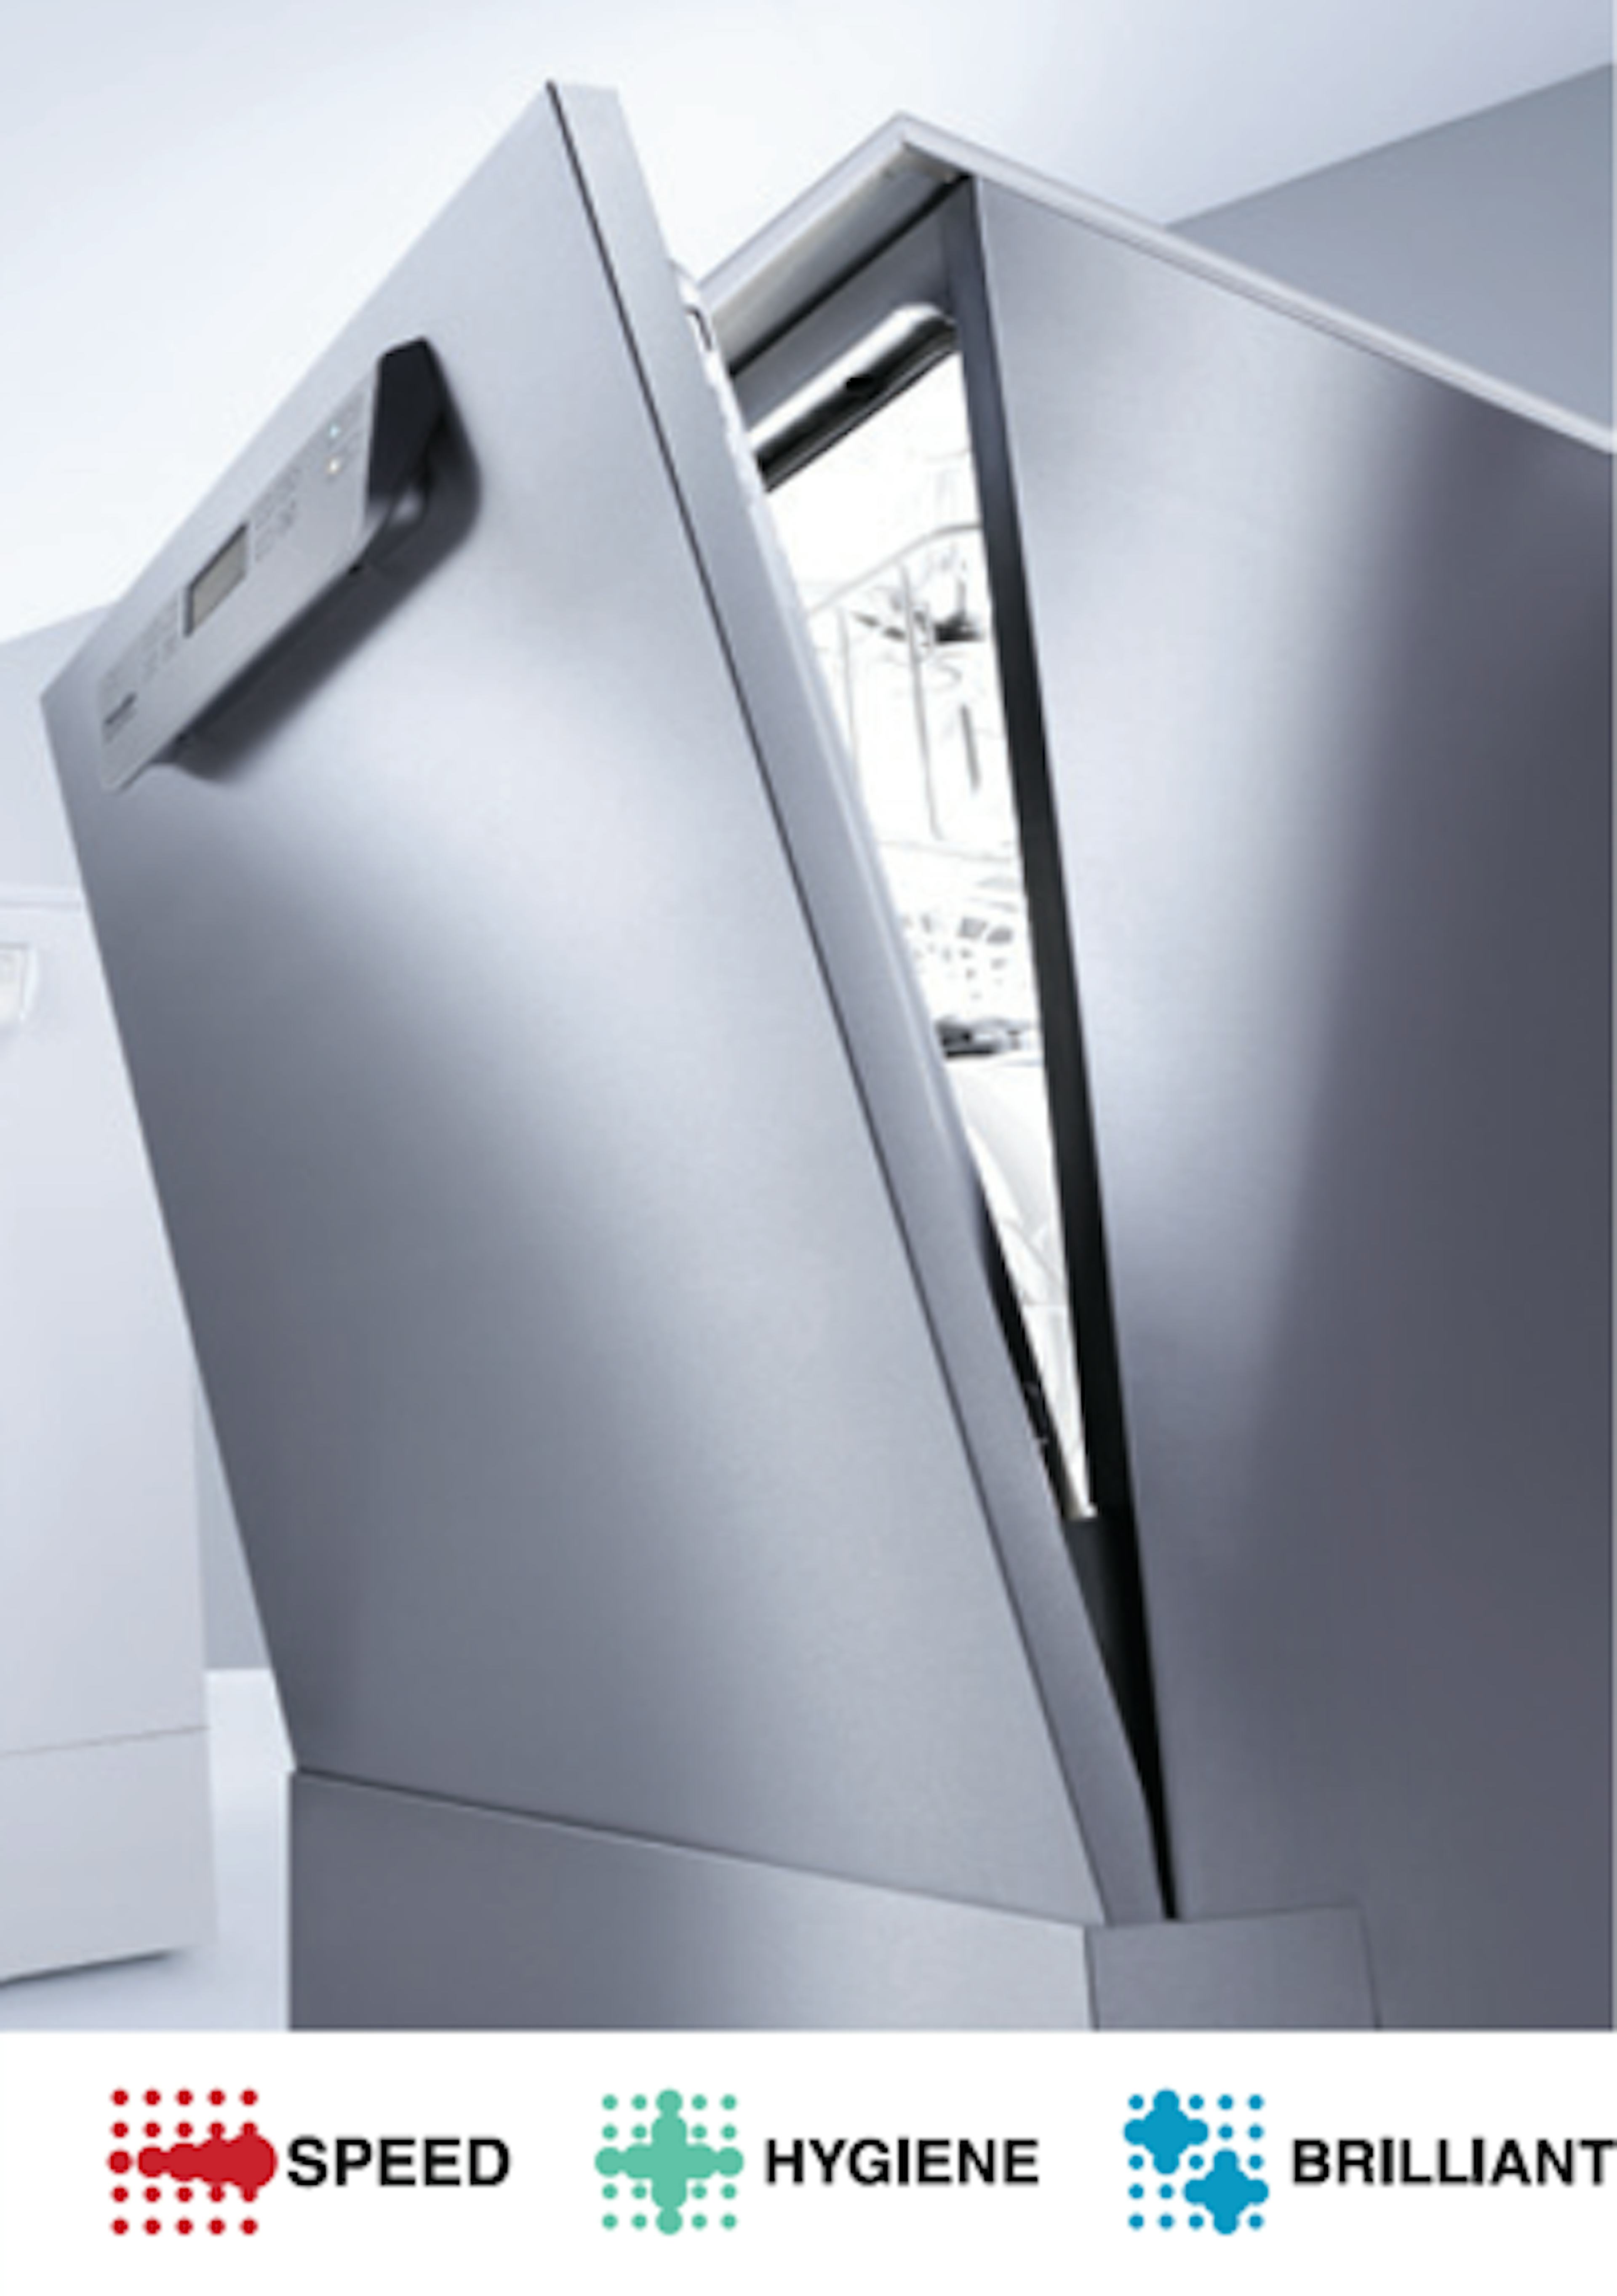 Miele launch their latest range of dishwashers